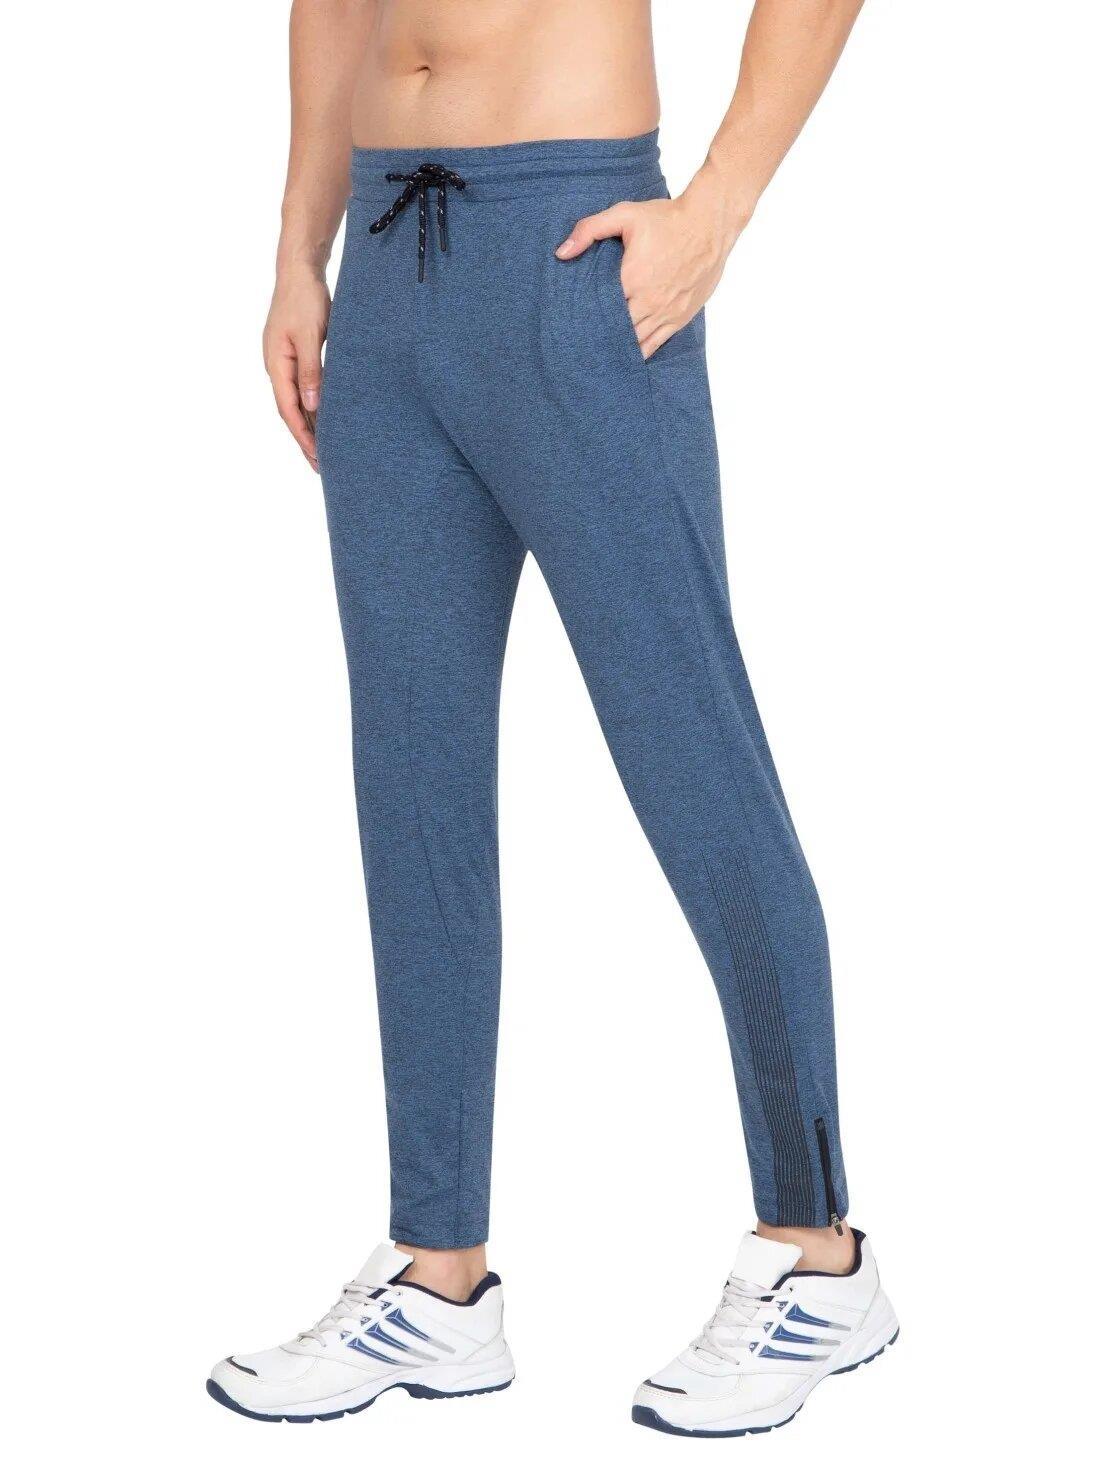 JOCKEY Blue Marl Track Pant in Nashik at best price by Shree Ganesha  Collection - Justdial